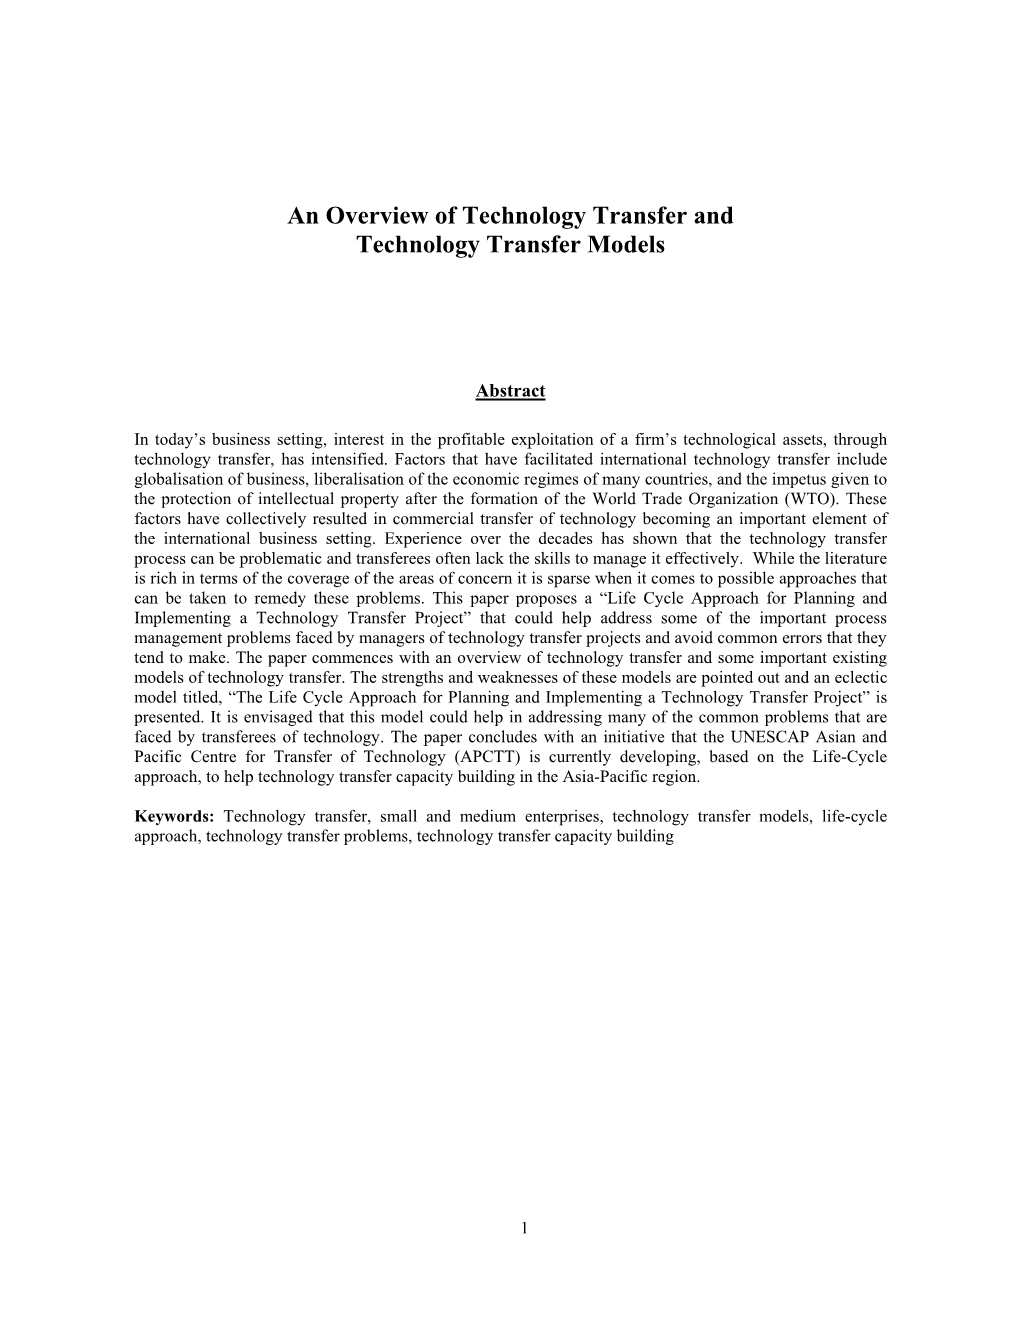 An Overview of Technology Transfer and Technology Transfer Models